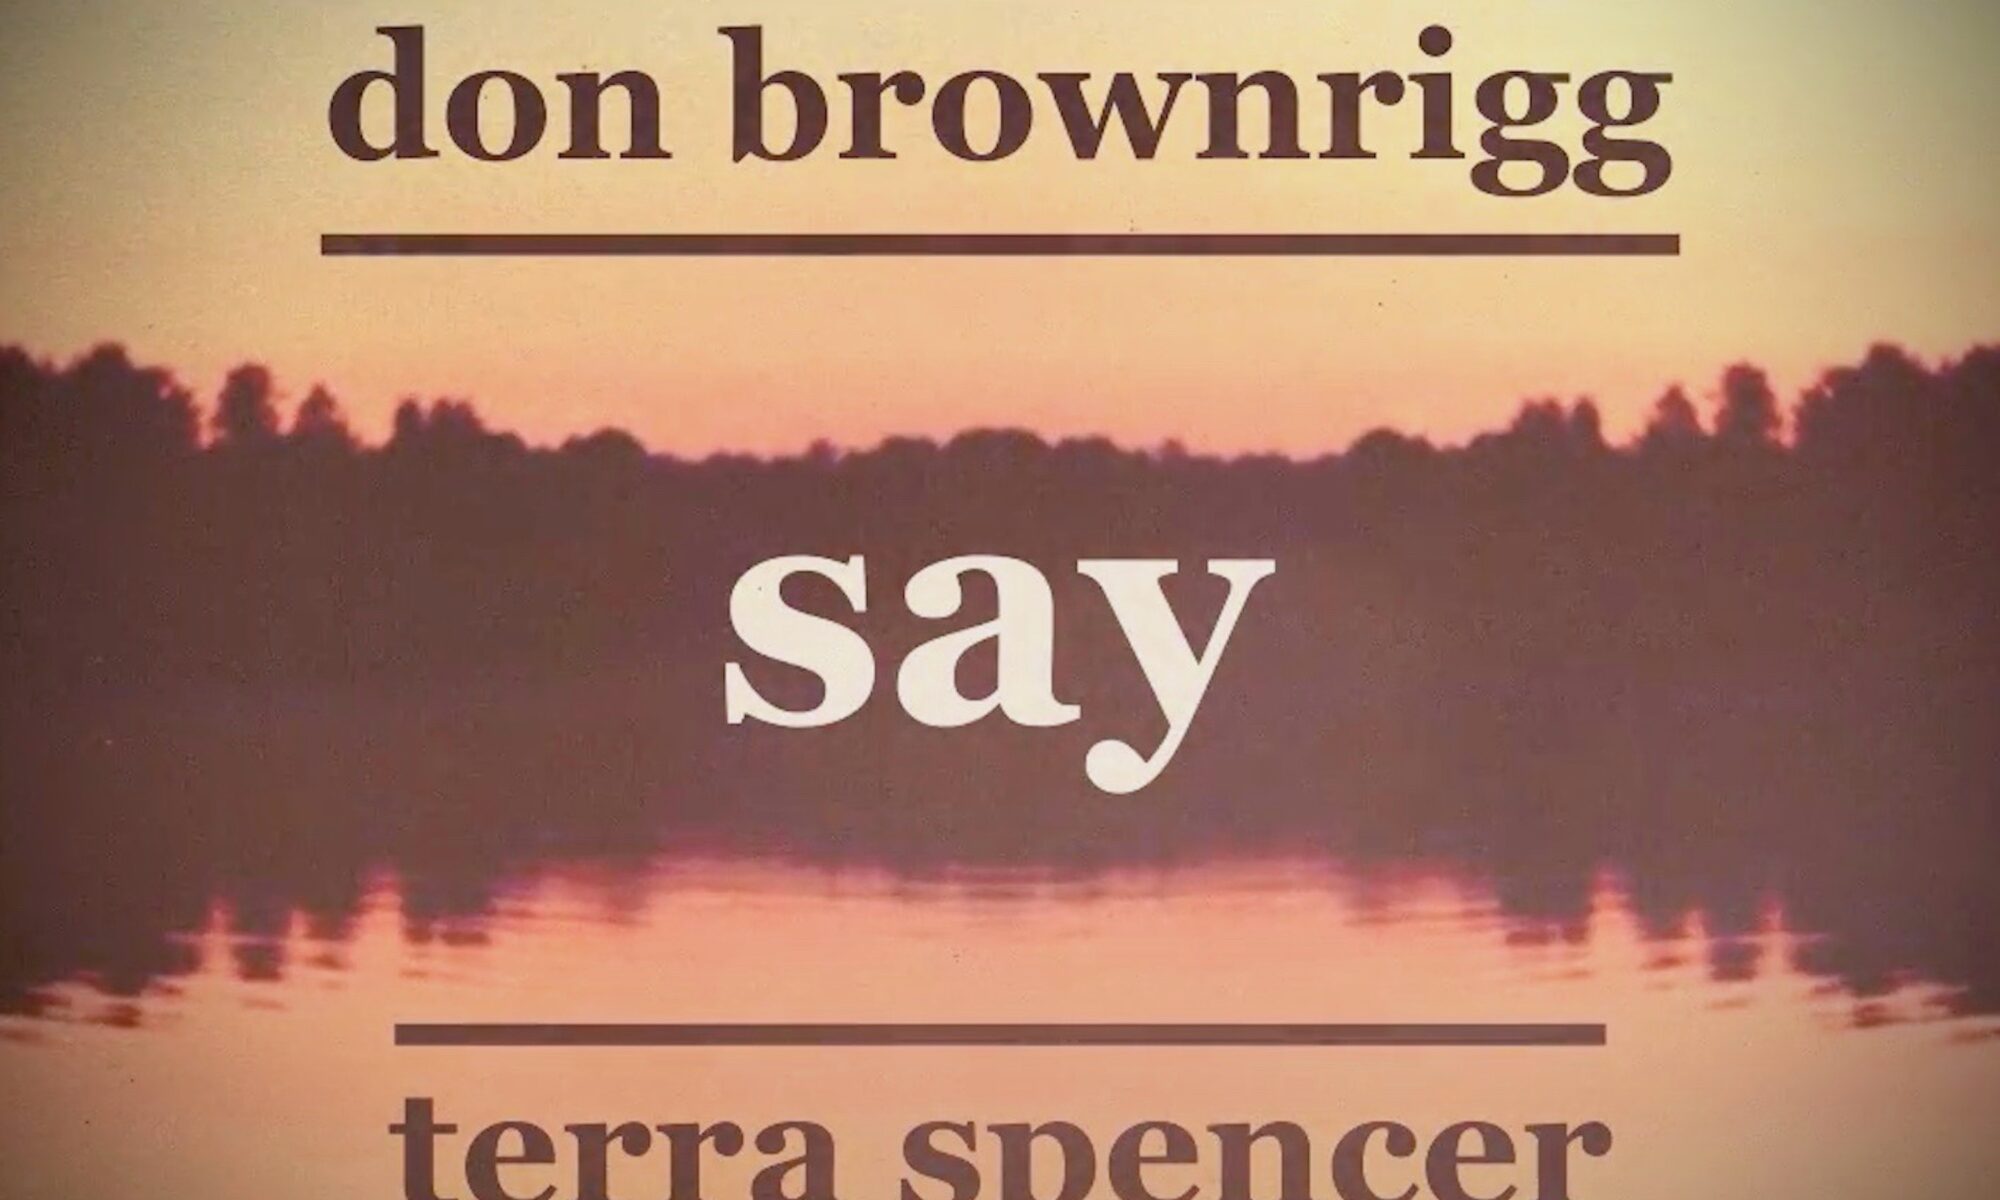 Music single CD cover for Don Brownrigg featuring Terra Spencer for the song Say